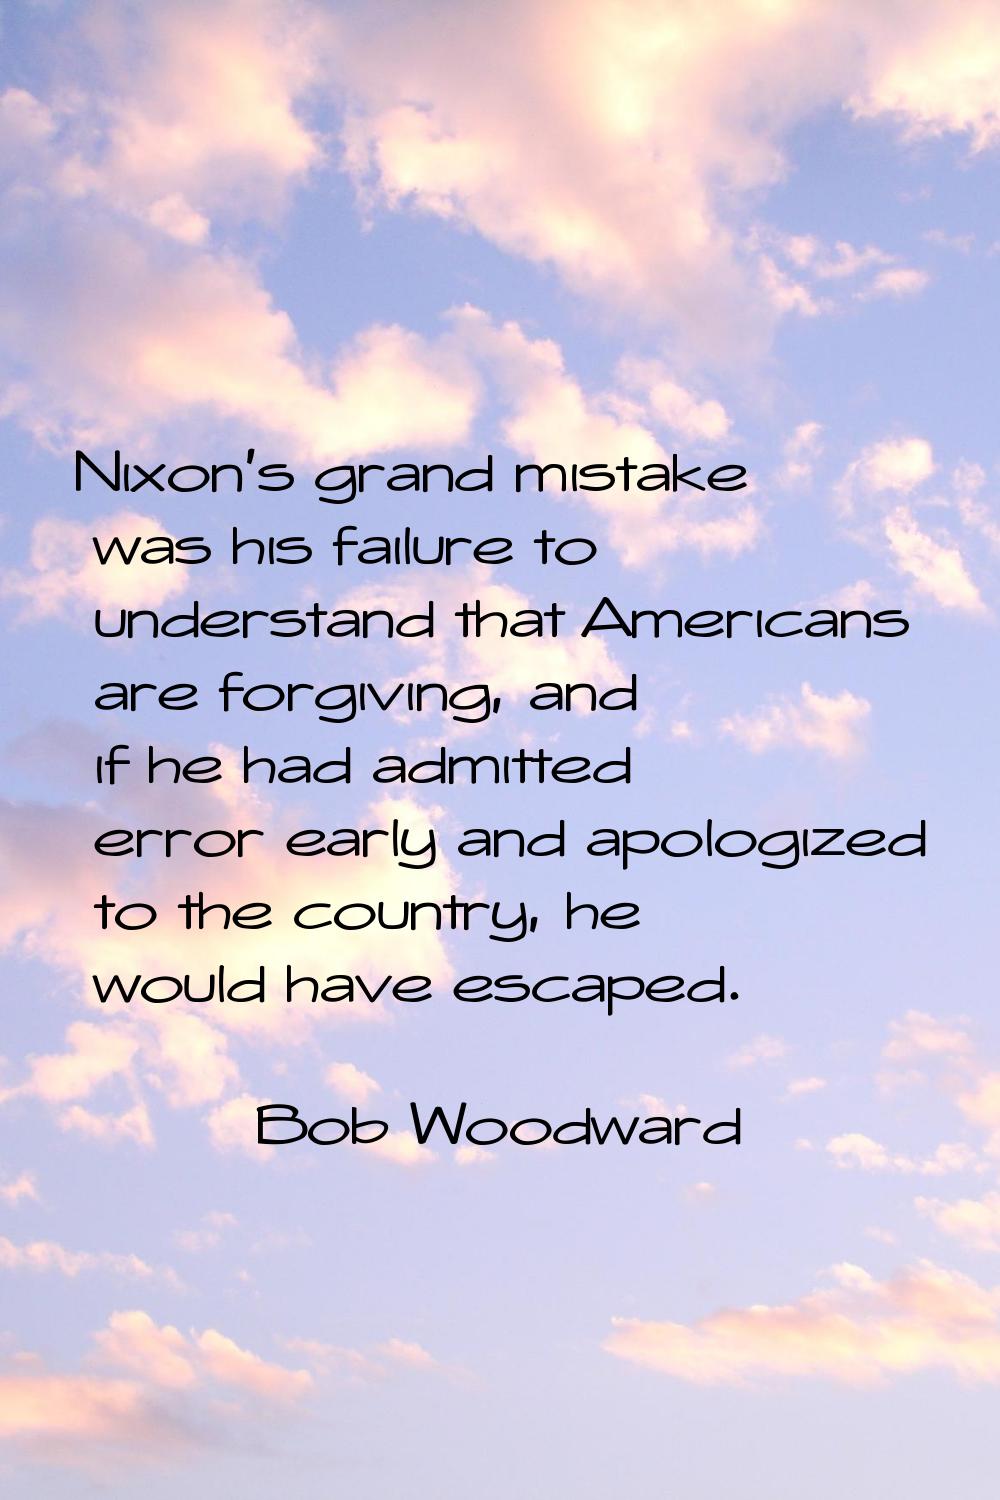 Nixon's grand mistake was his failure to understand that Americans are forgiving, and if he had adm